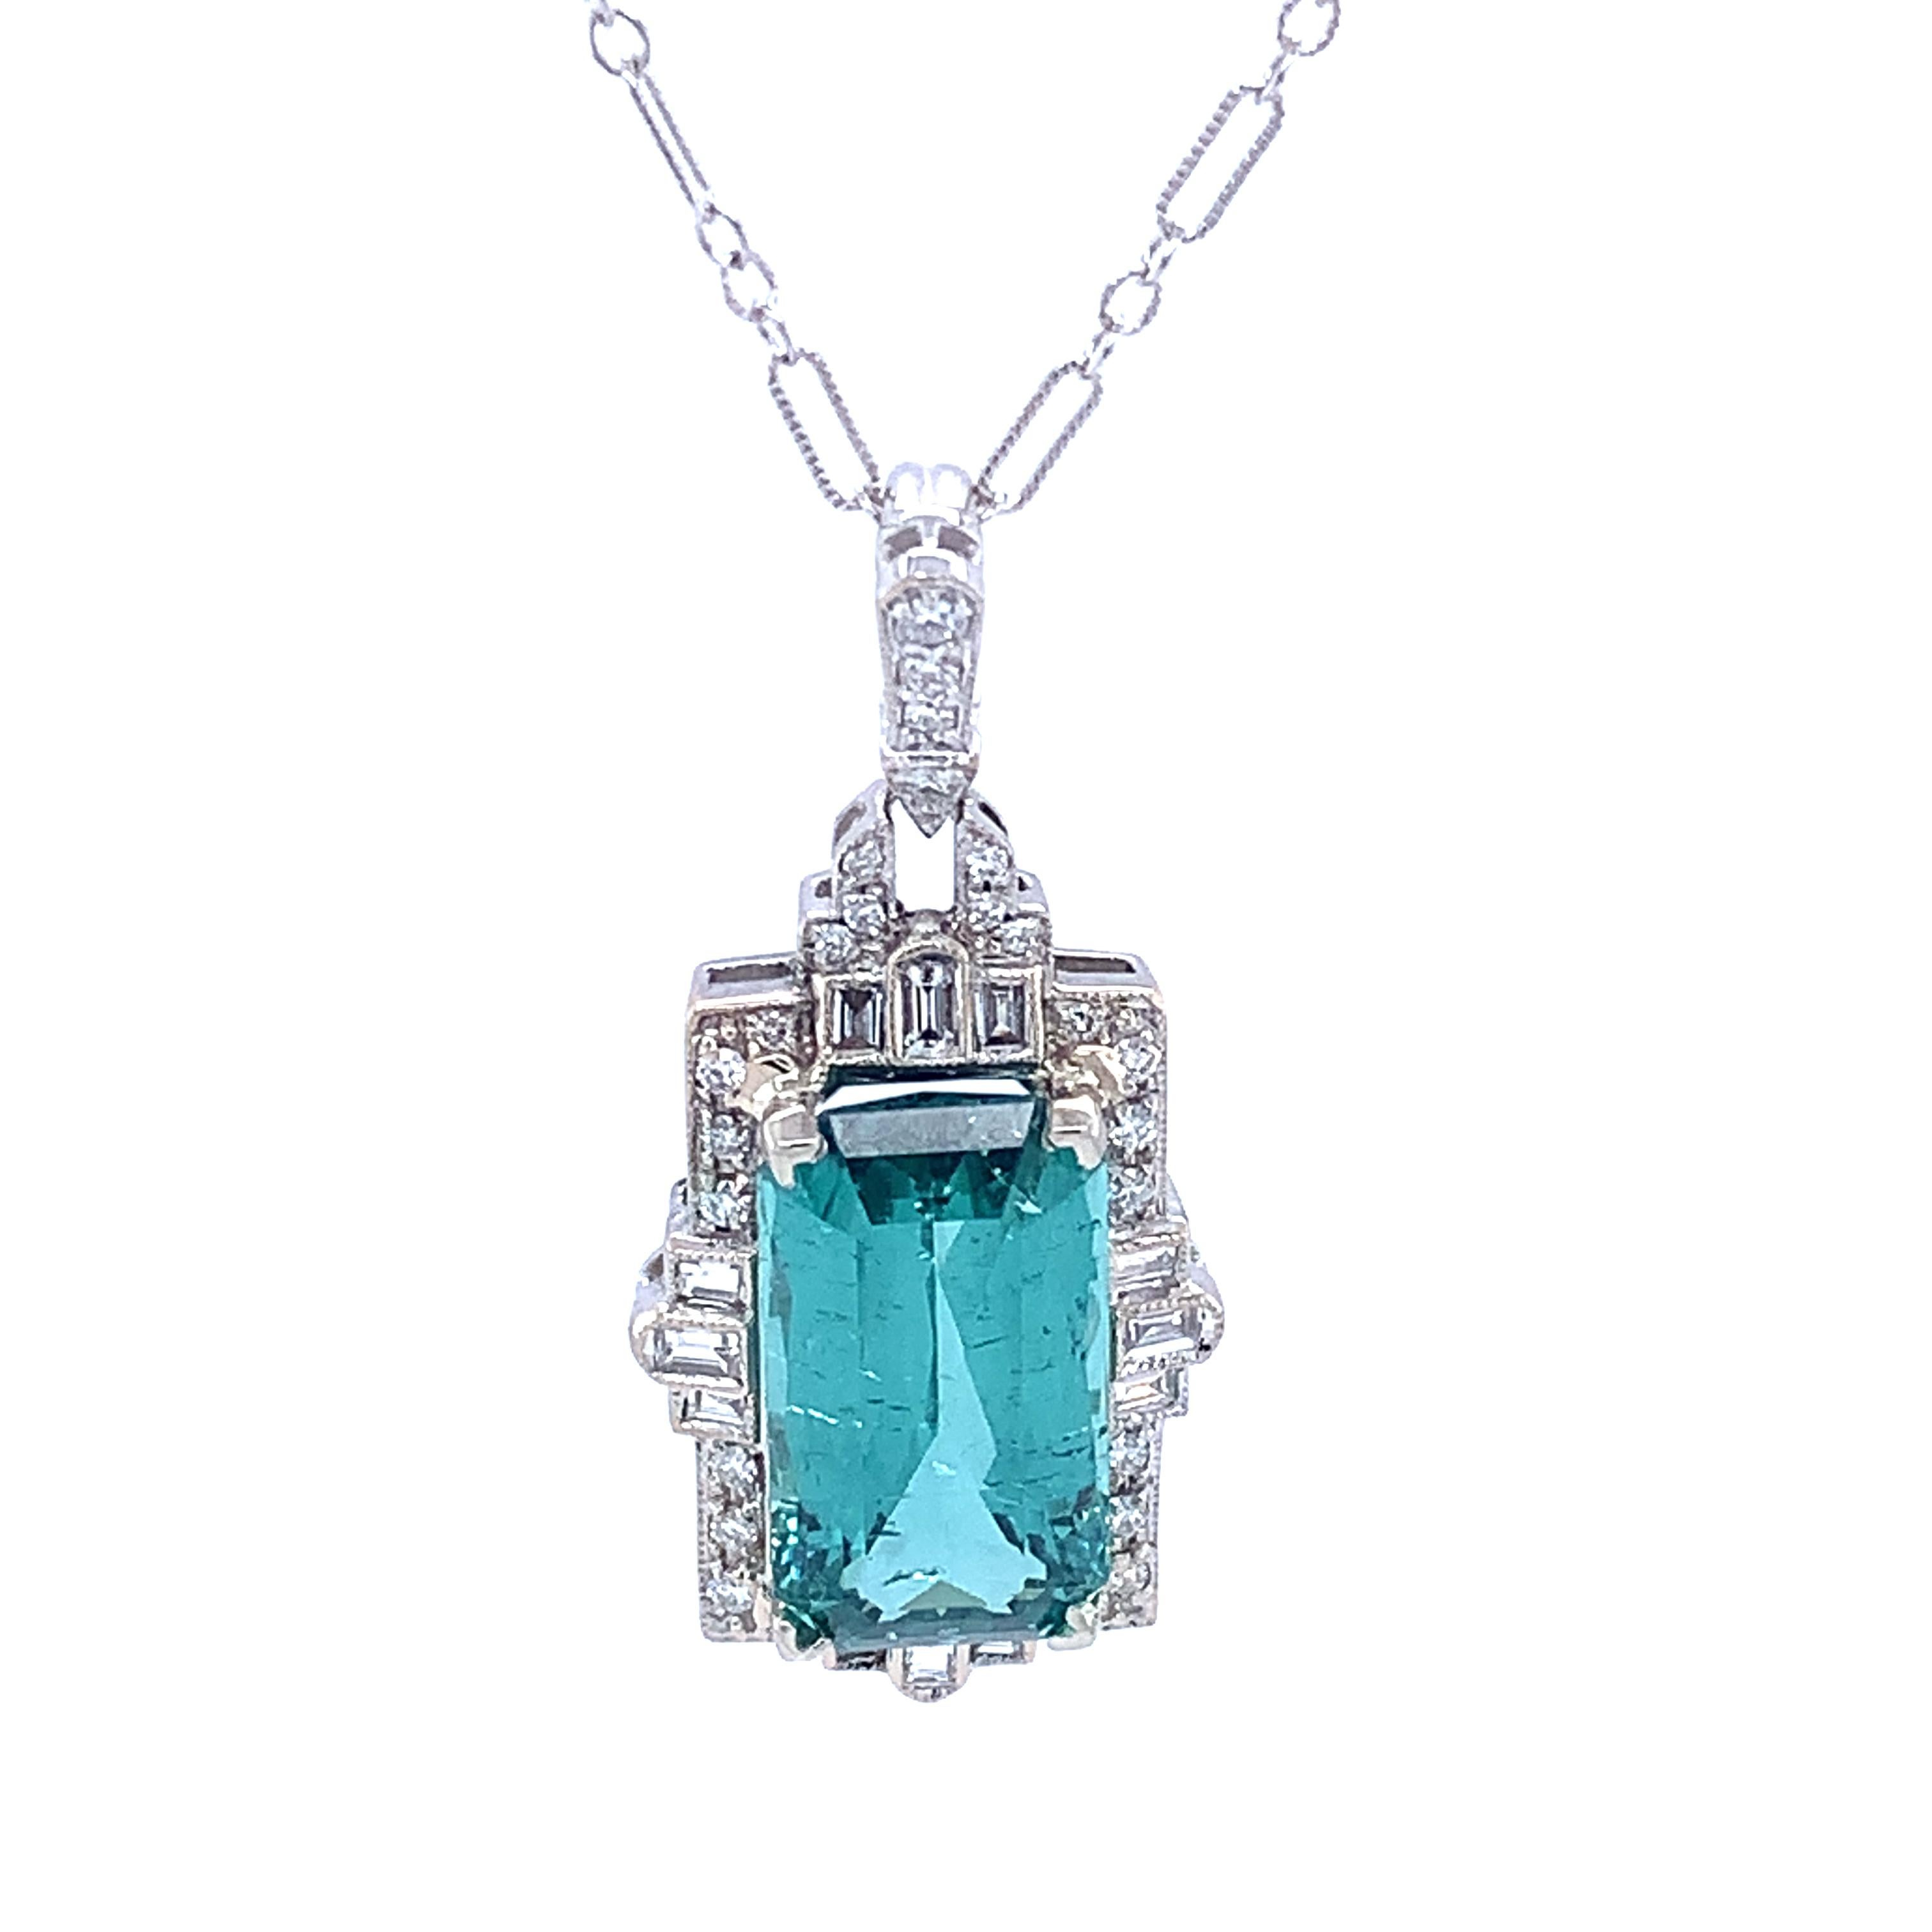 18K white gold pendant featuring a spectacular teal green tourmaline weighing 9.60 carats. The tourmaline is a rectangular radiant with blue-green color. The color is more like the photo on the grey bust, not as blue as shown in the light box. The